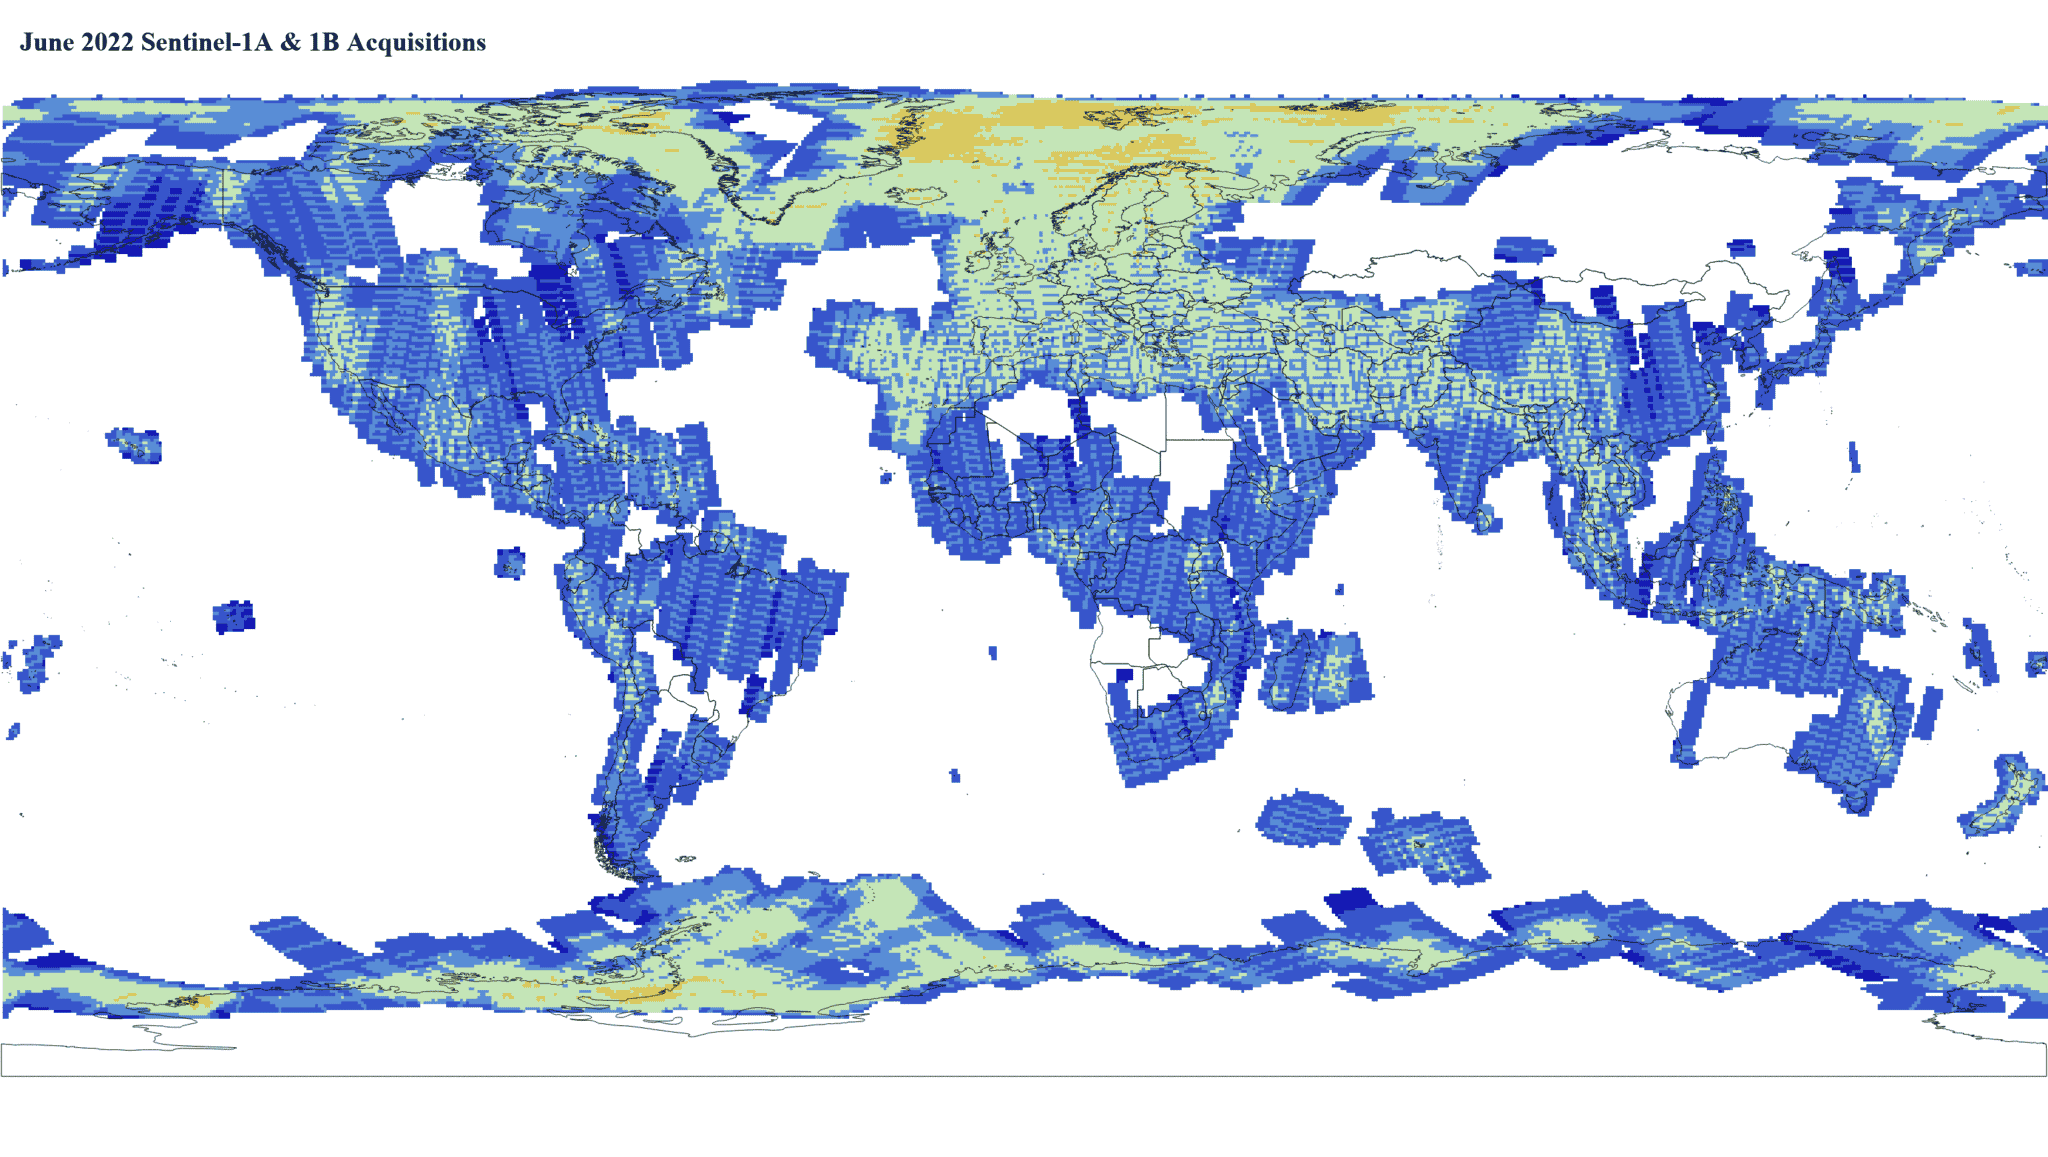 Heat map of Sentinel-1A and -1B GRD global acquisitions June 2022